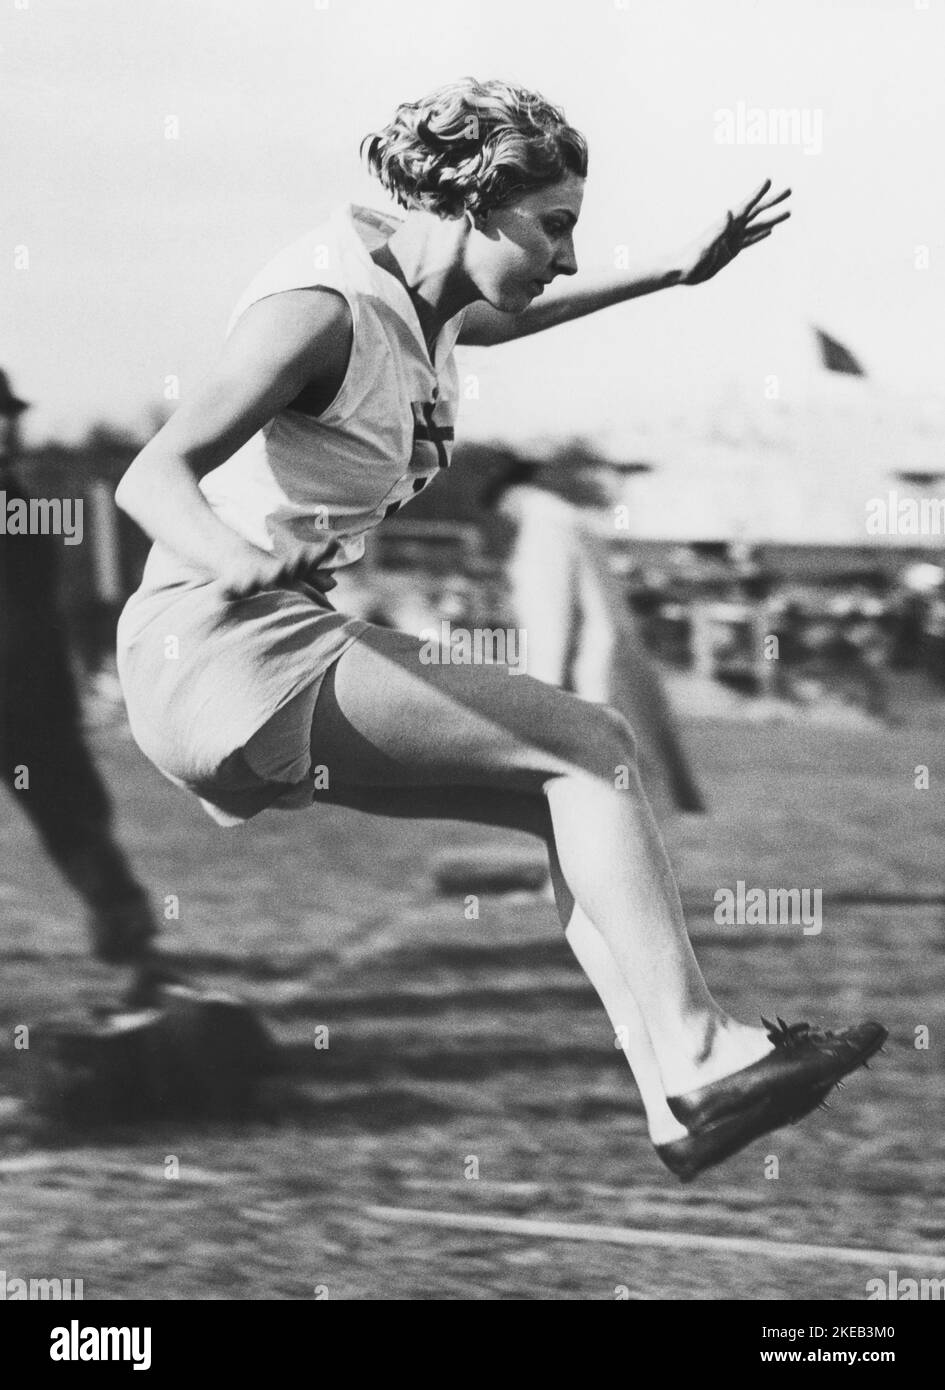 In the 1930s. Swedish athlete Susanne Danielsson pictured in action when competing in the long jump at the Oval arena, Stanley Park in Blackpool England on june 9 1936. Stock Photo